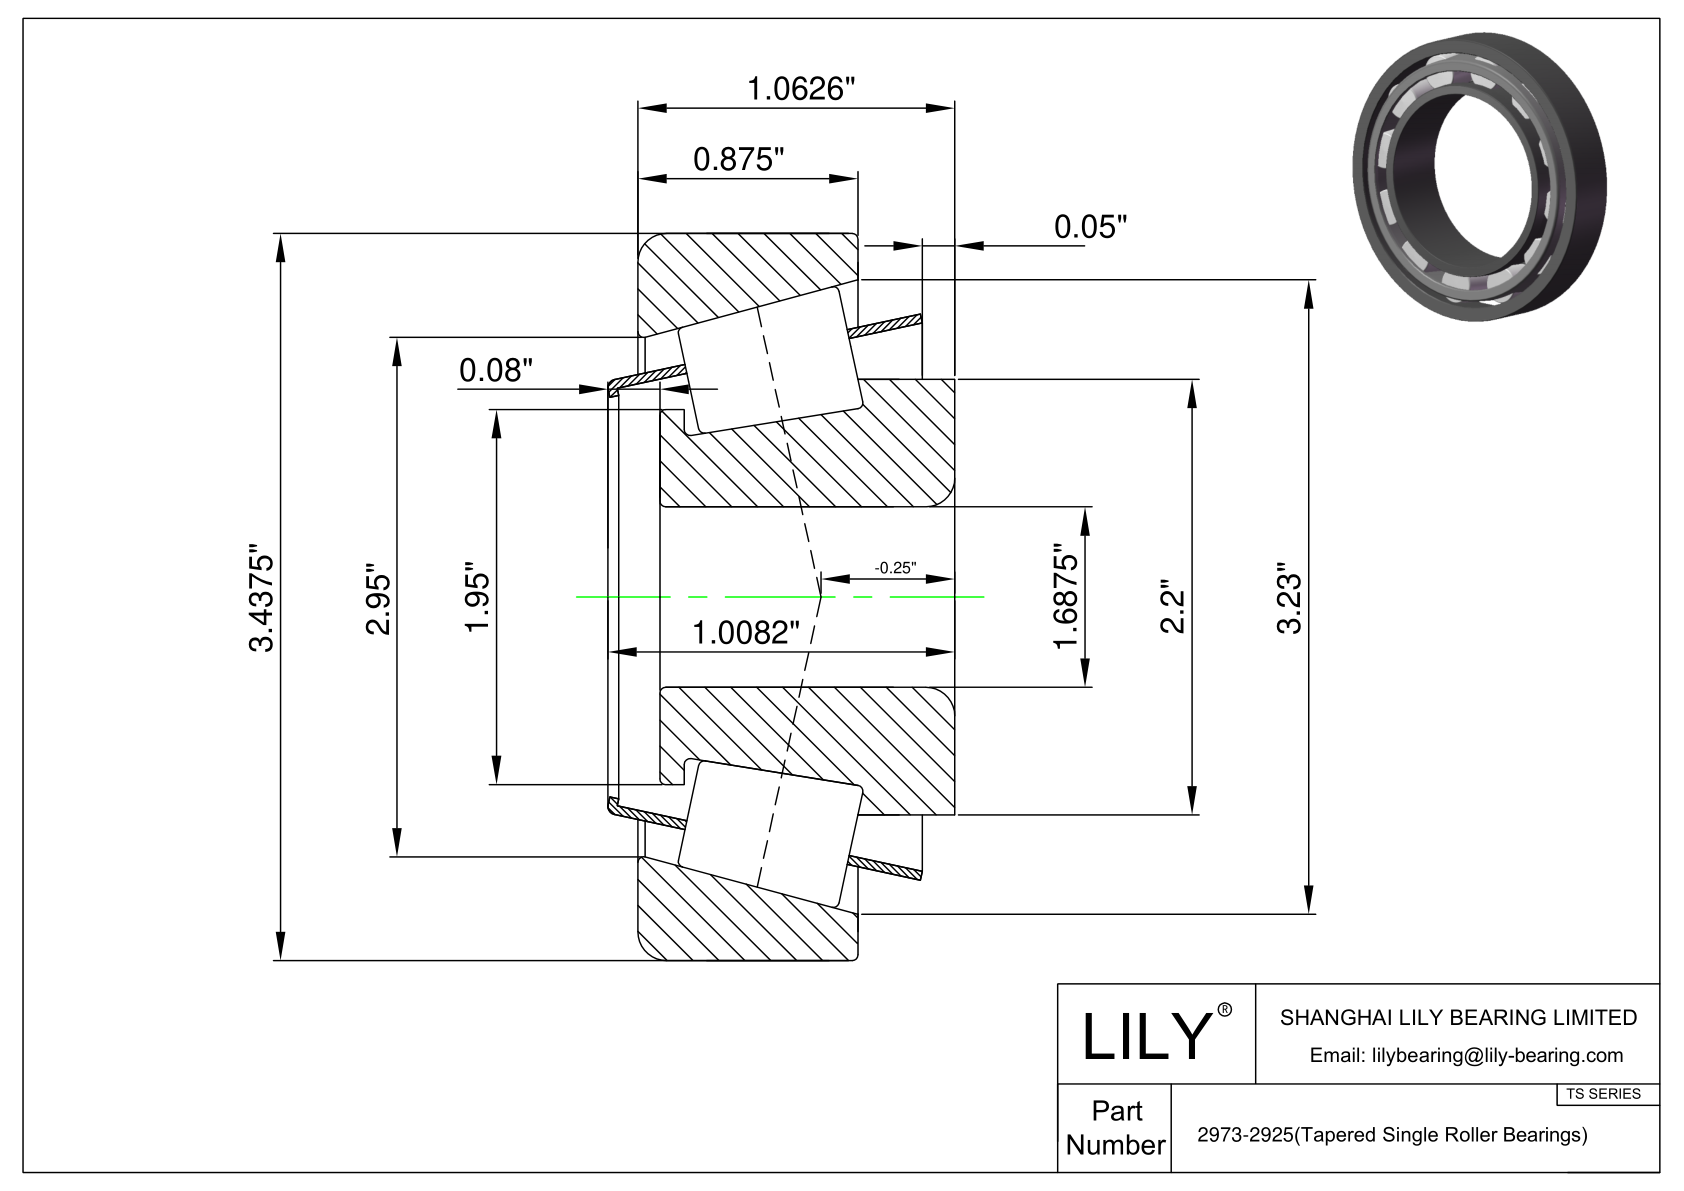 2973-2925 TS (Tapered Single Roller Bearings) (Imperial) cad drawing